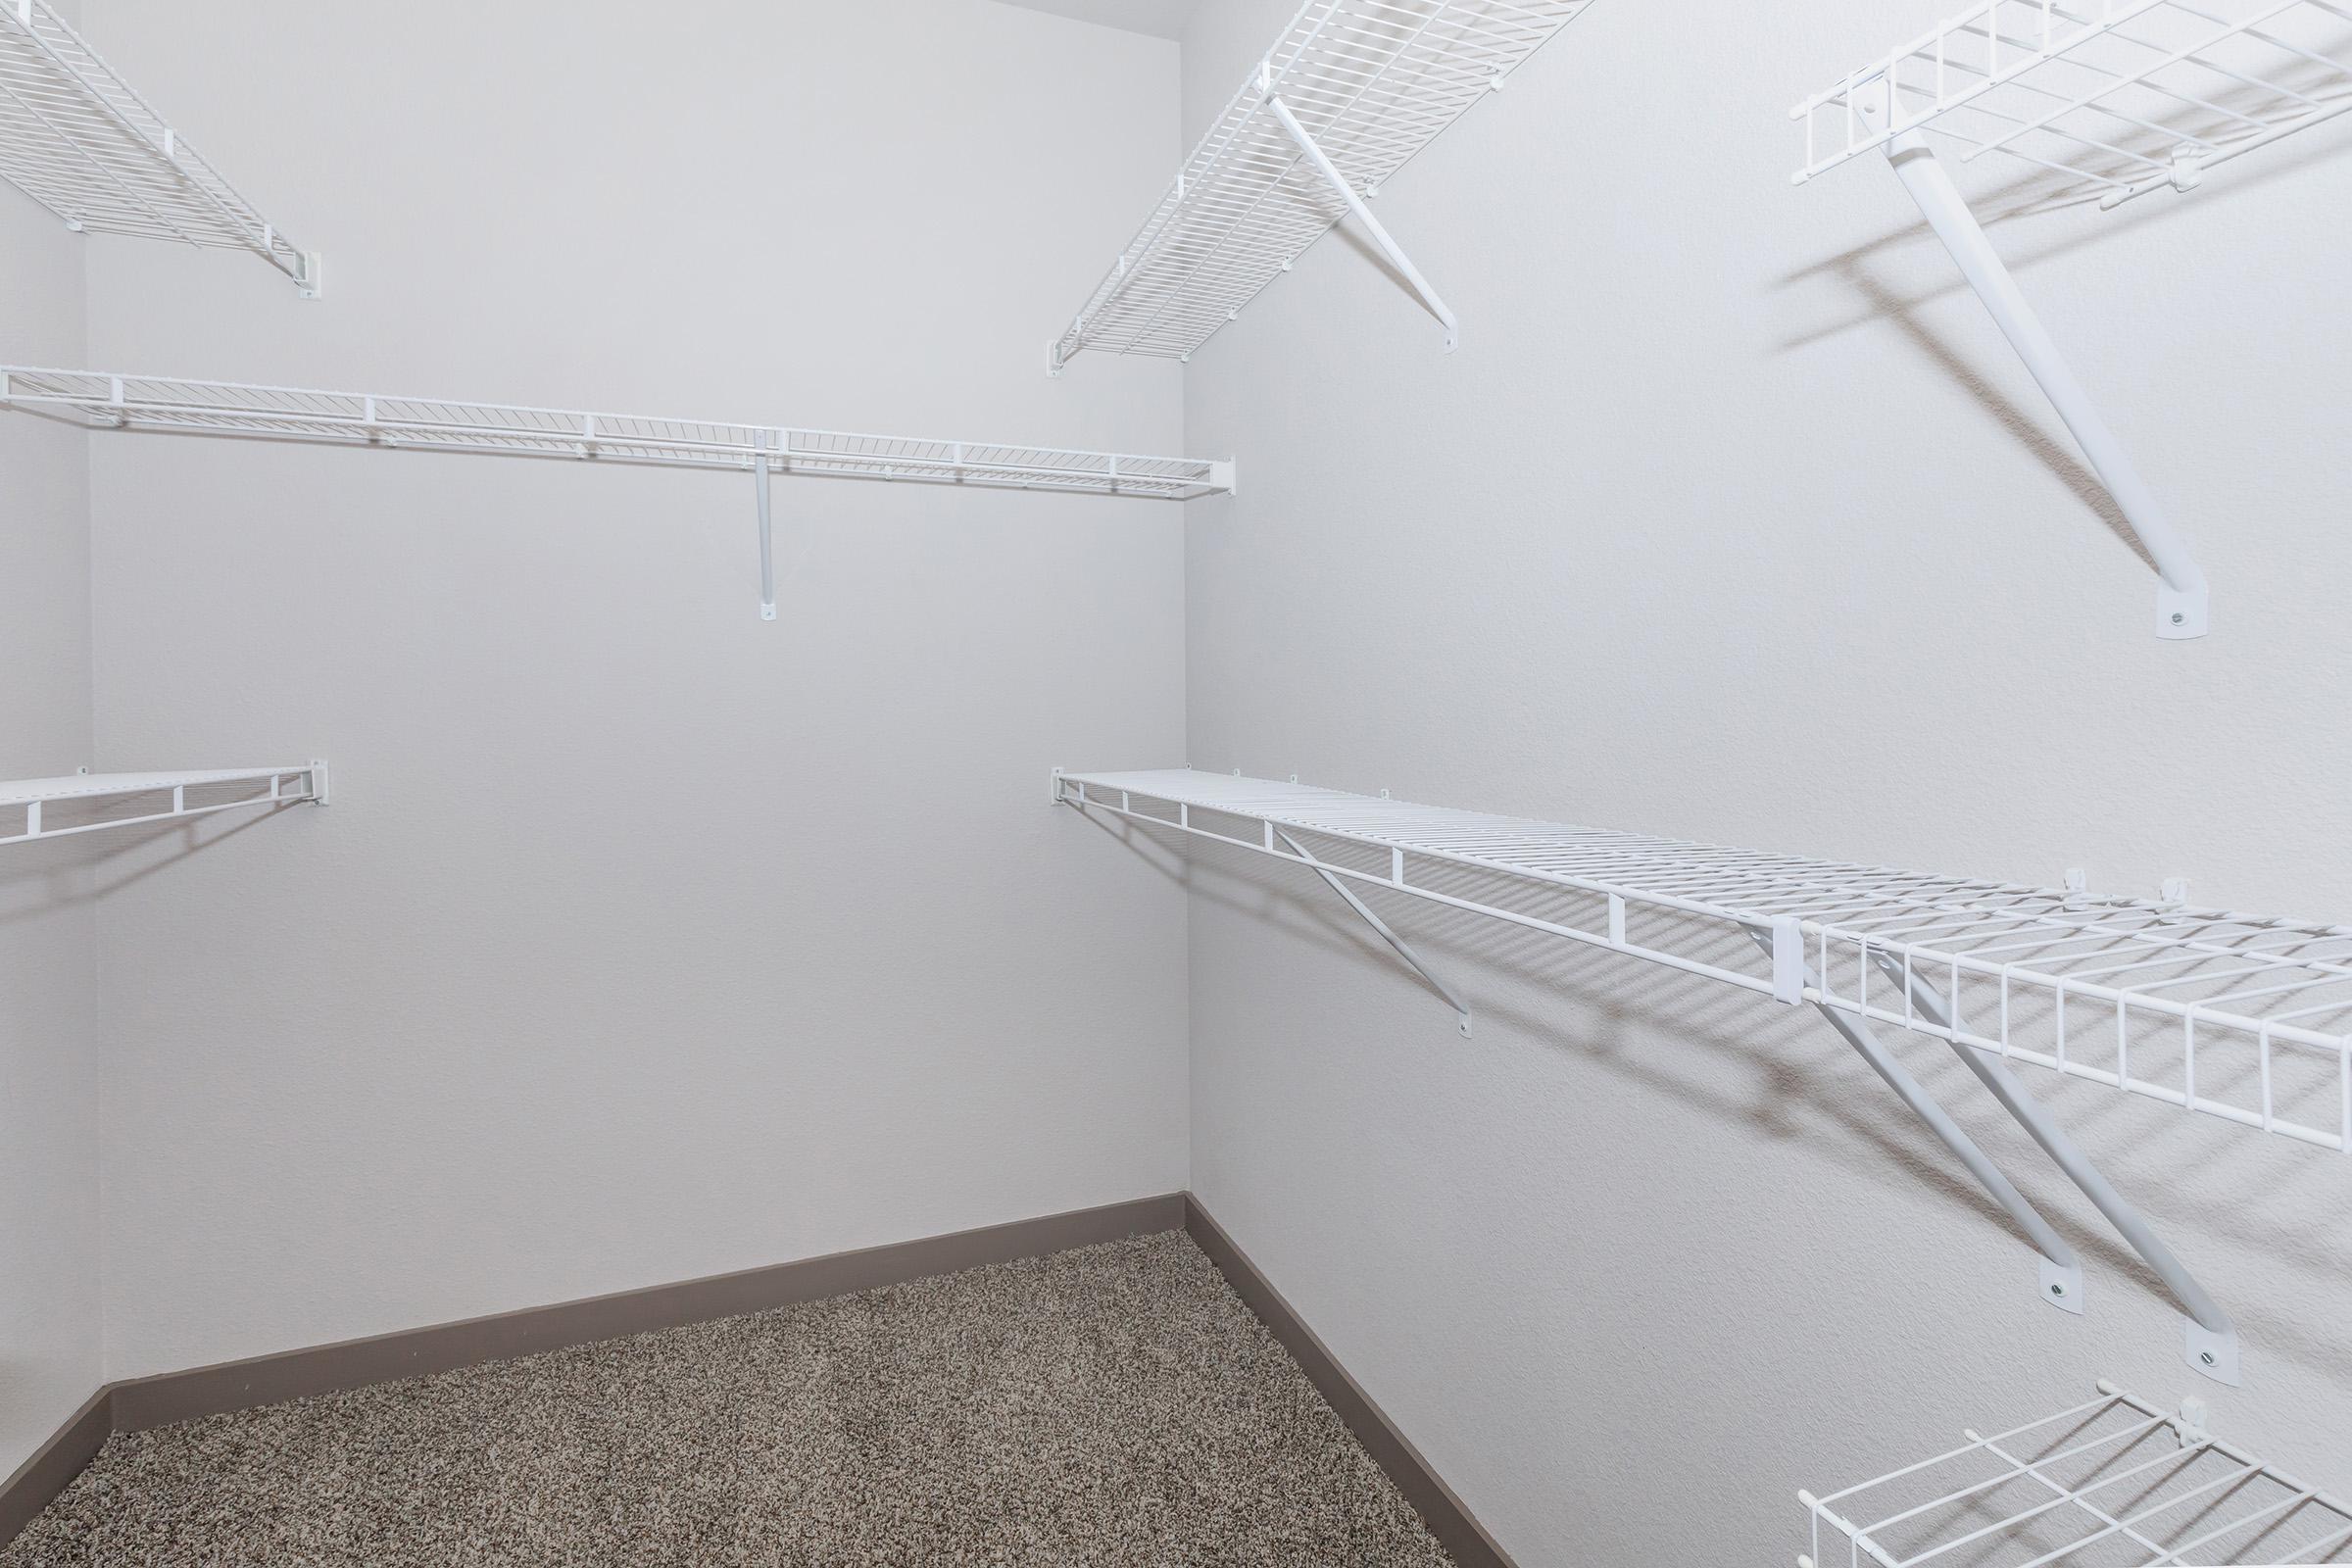 LARGE WALK-IN CLOSETS